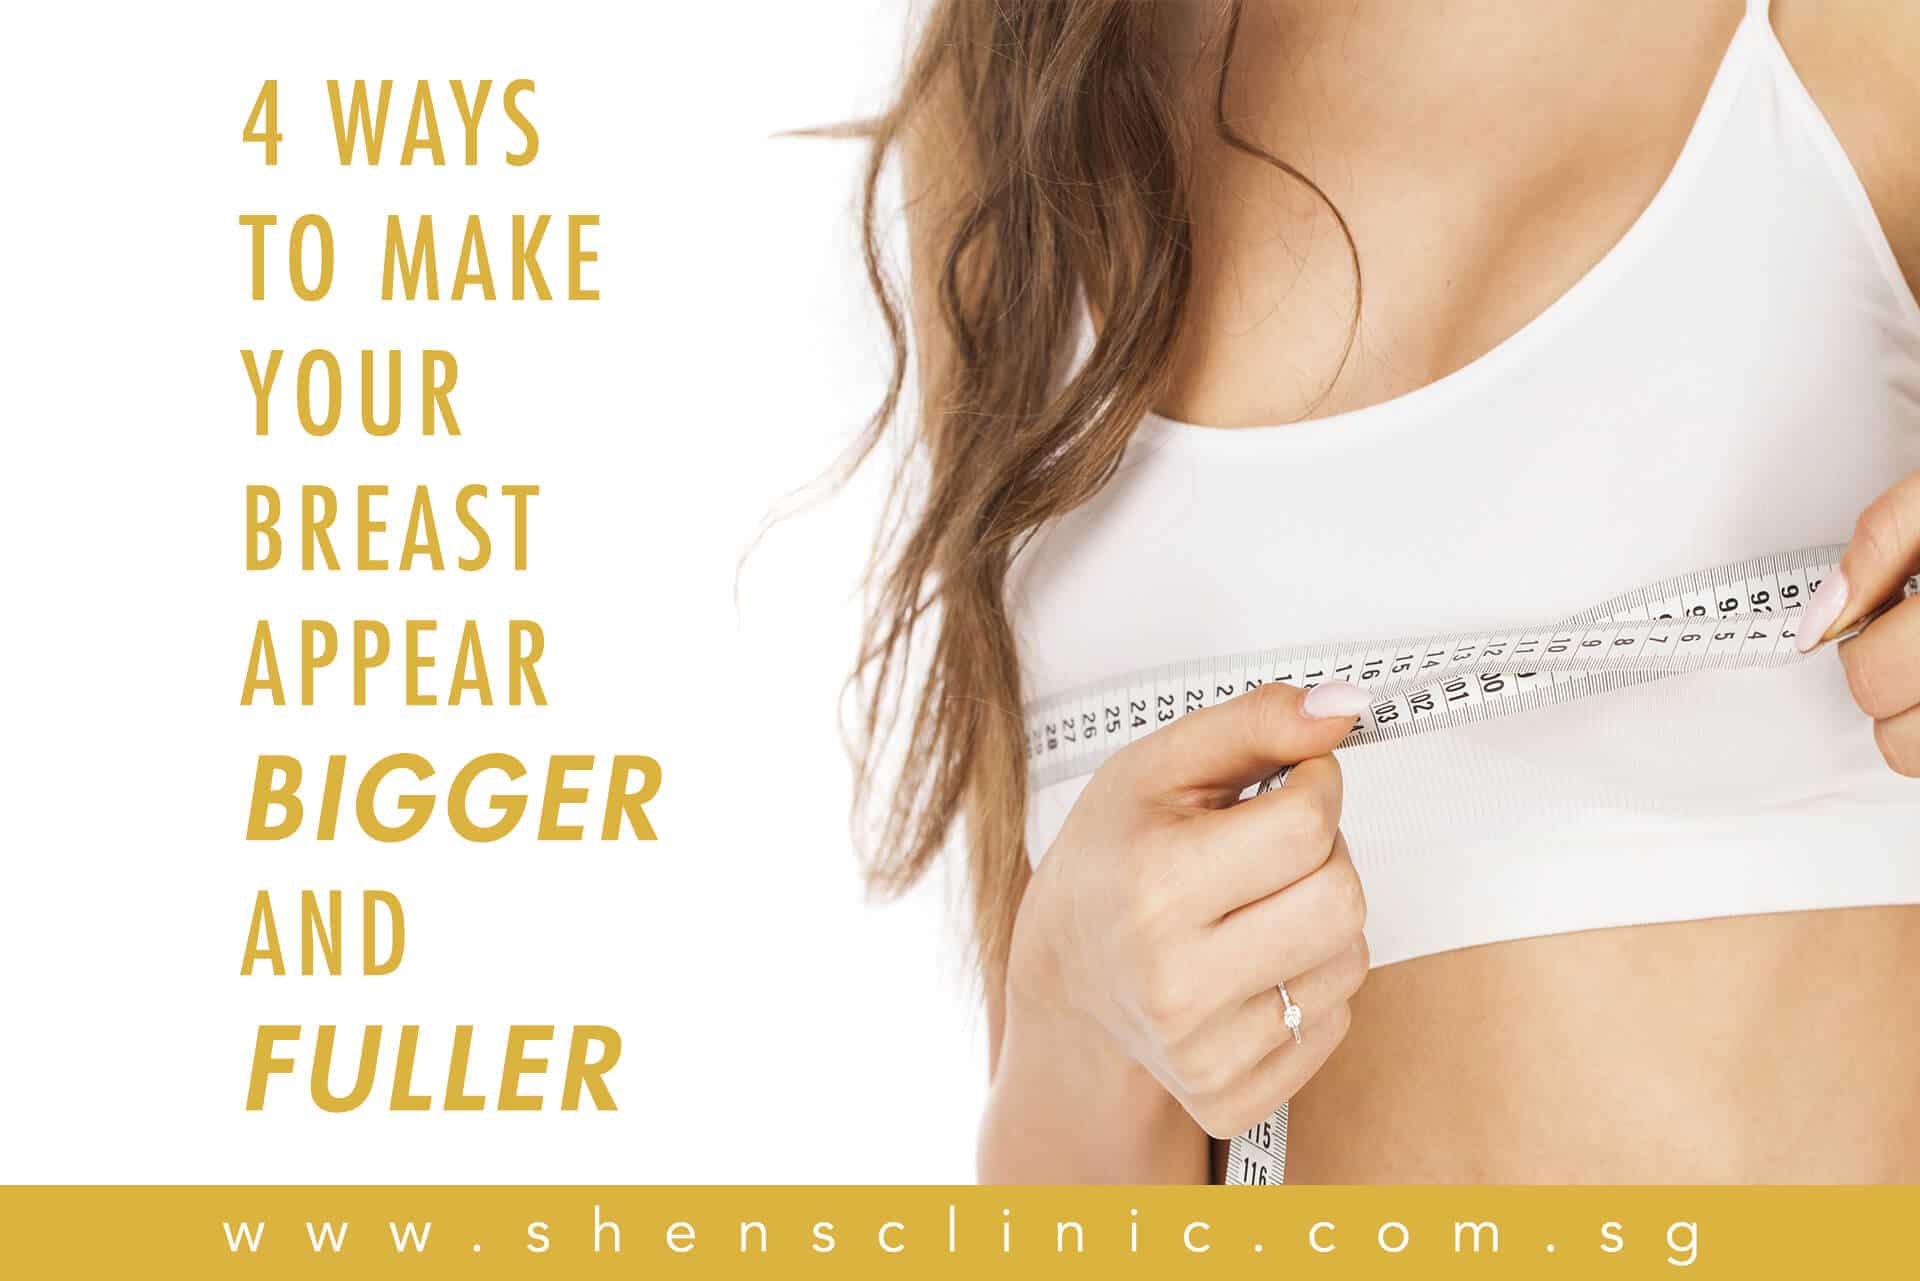 4 ways to make your breasts appear bigger and fuller